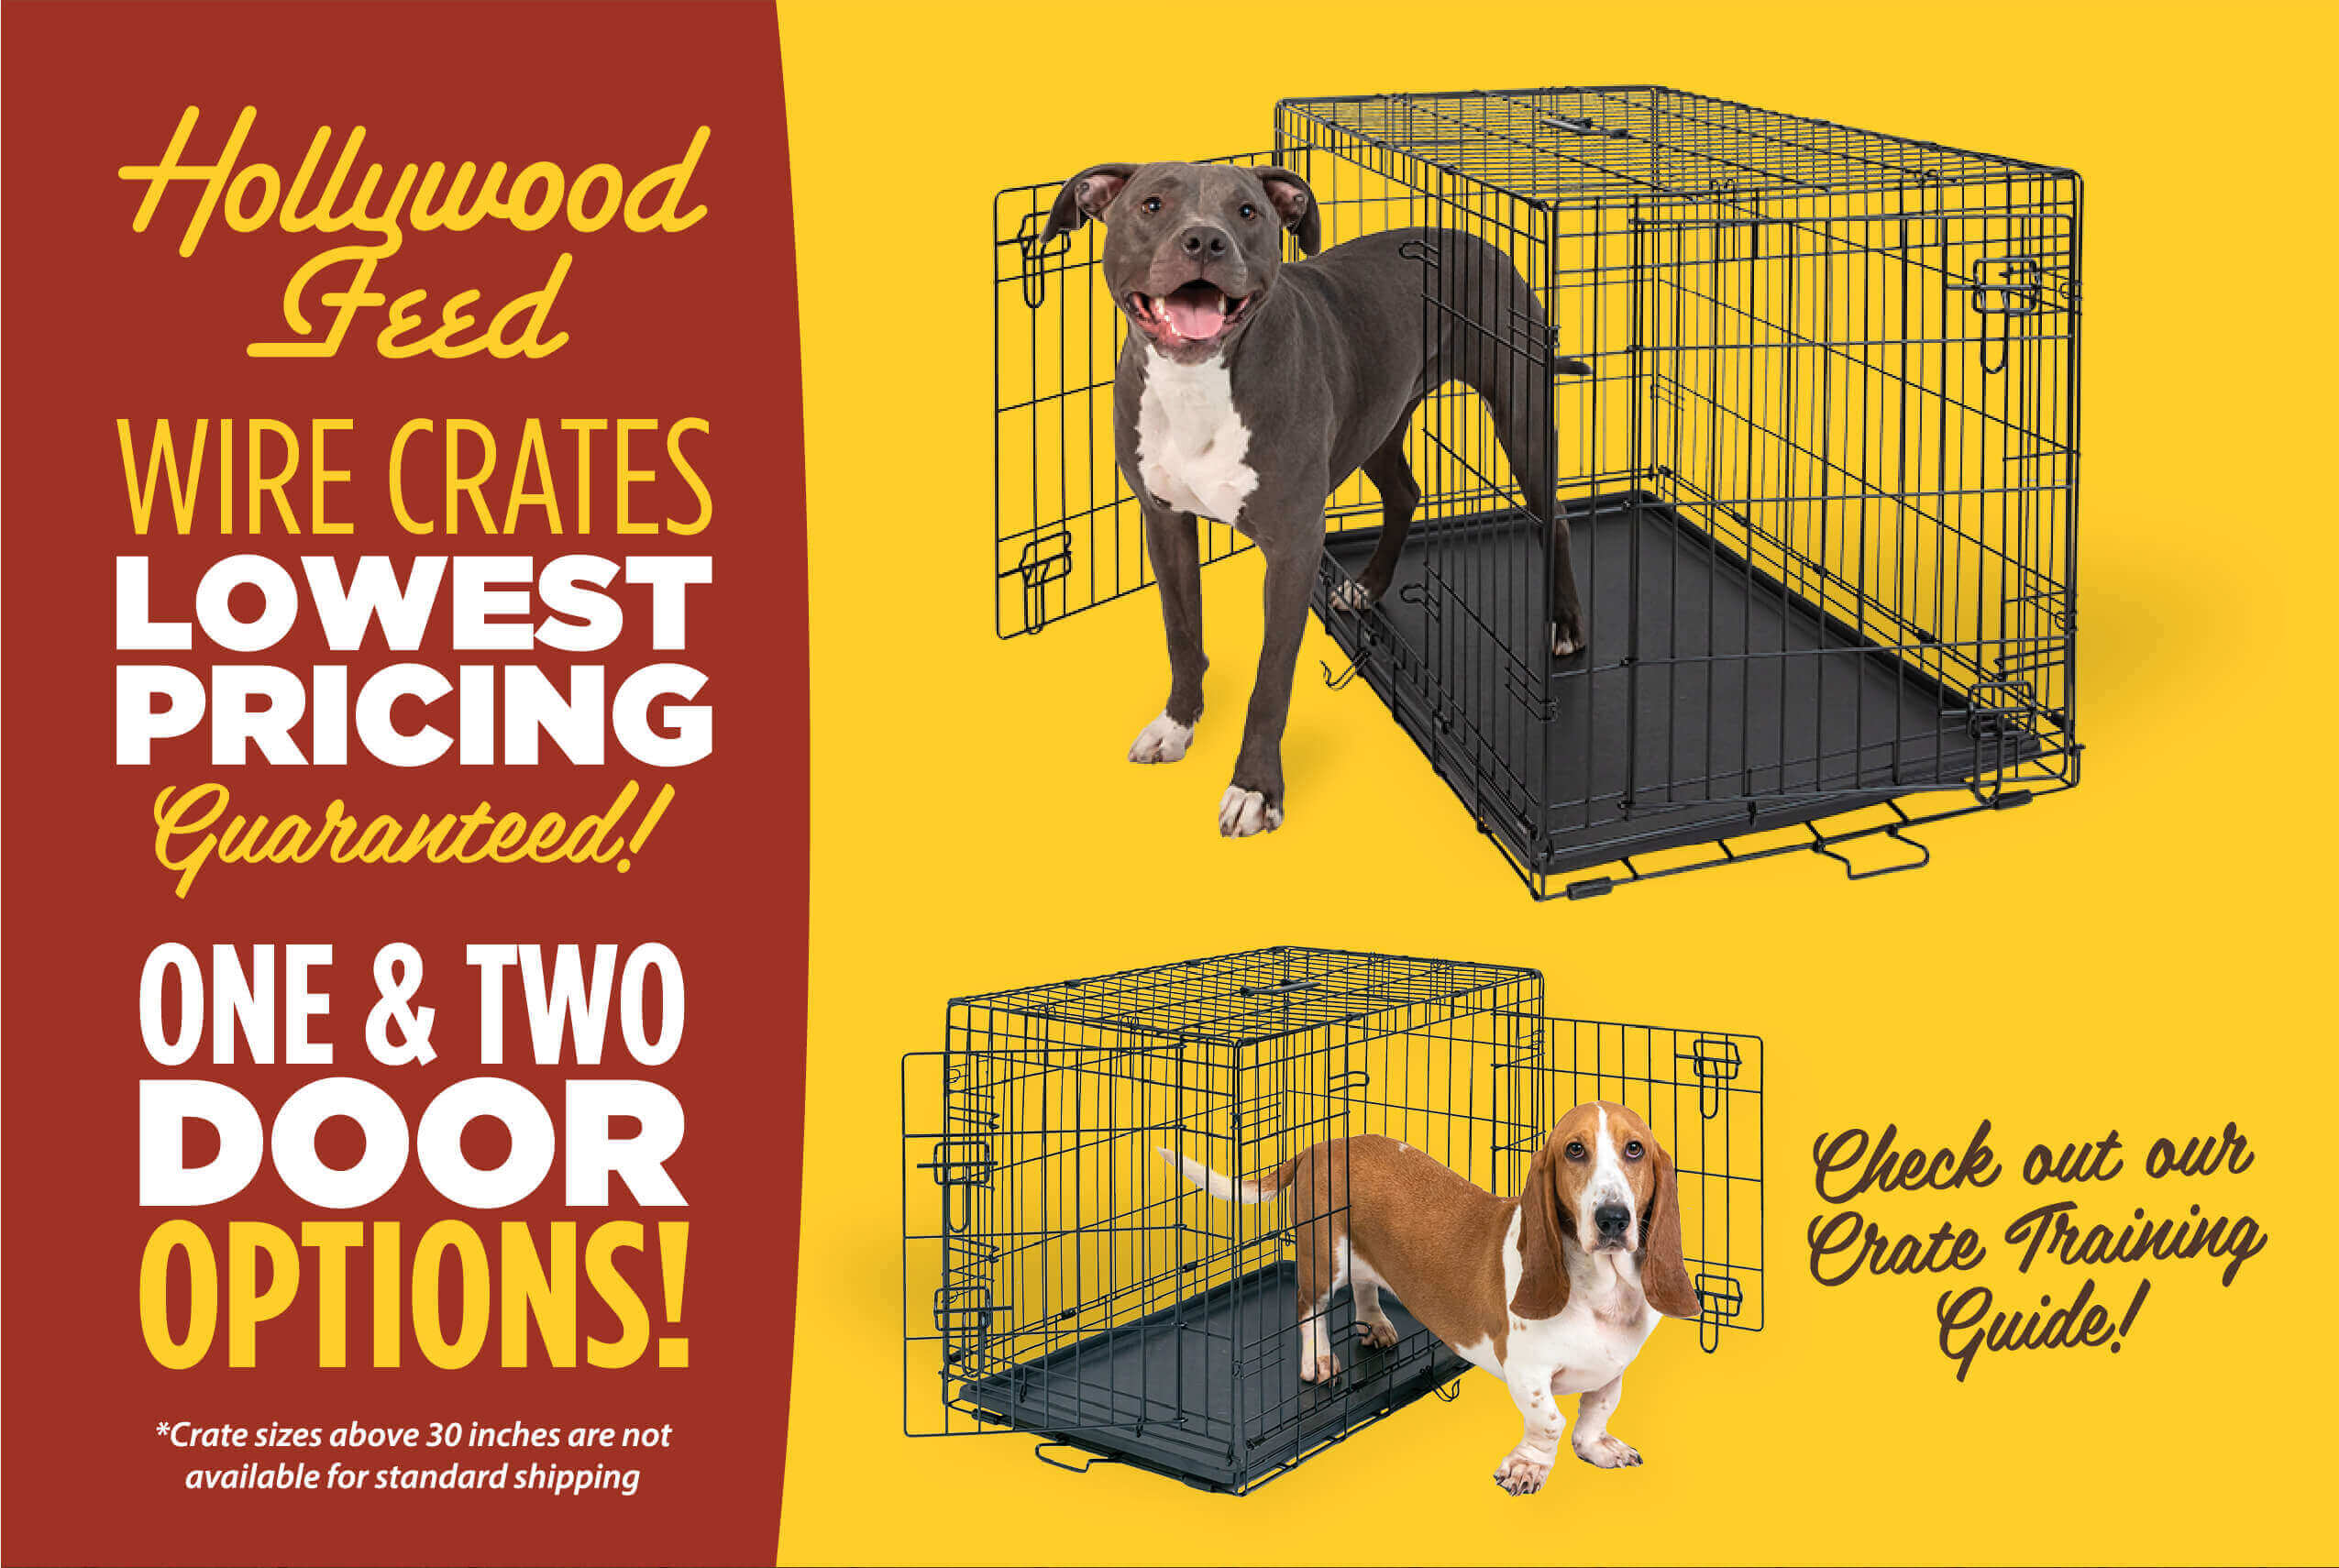 HF Wire Crates Lowest Pricing Guaranteed! One and Two Door Options! *Crate sizes above 30 inches are not available for standard shipping!